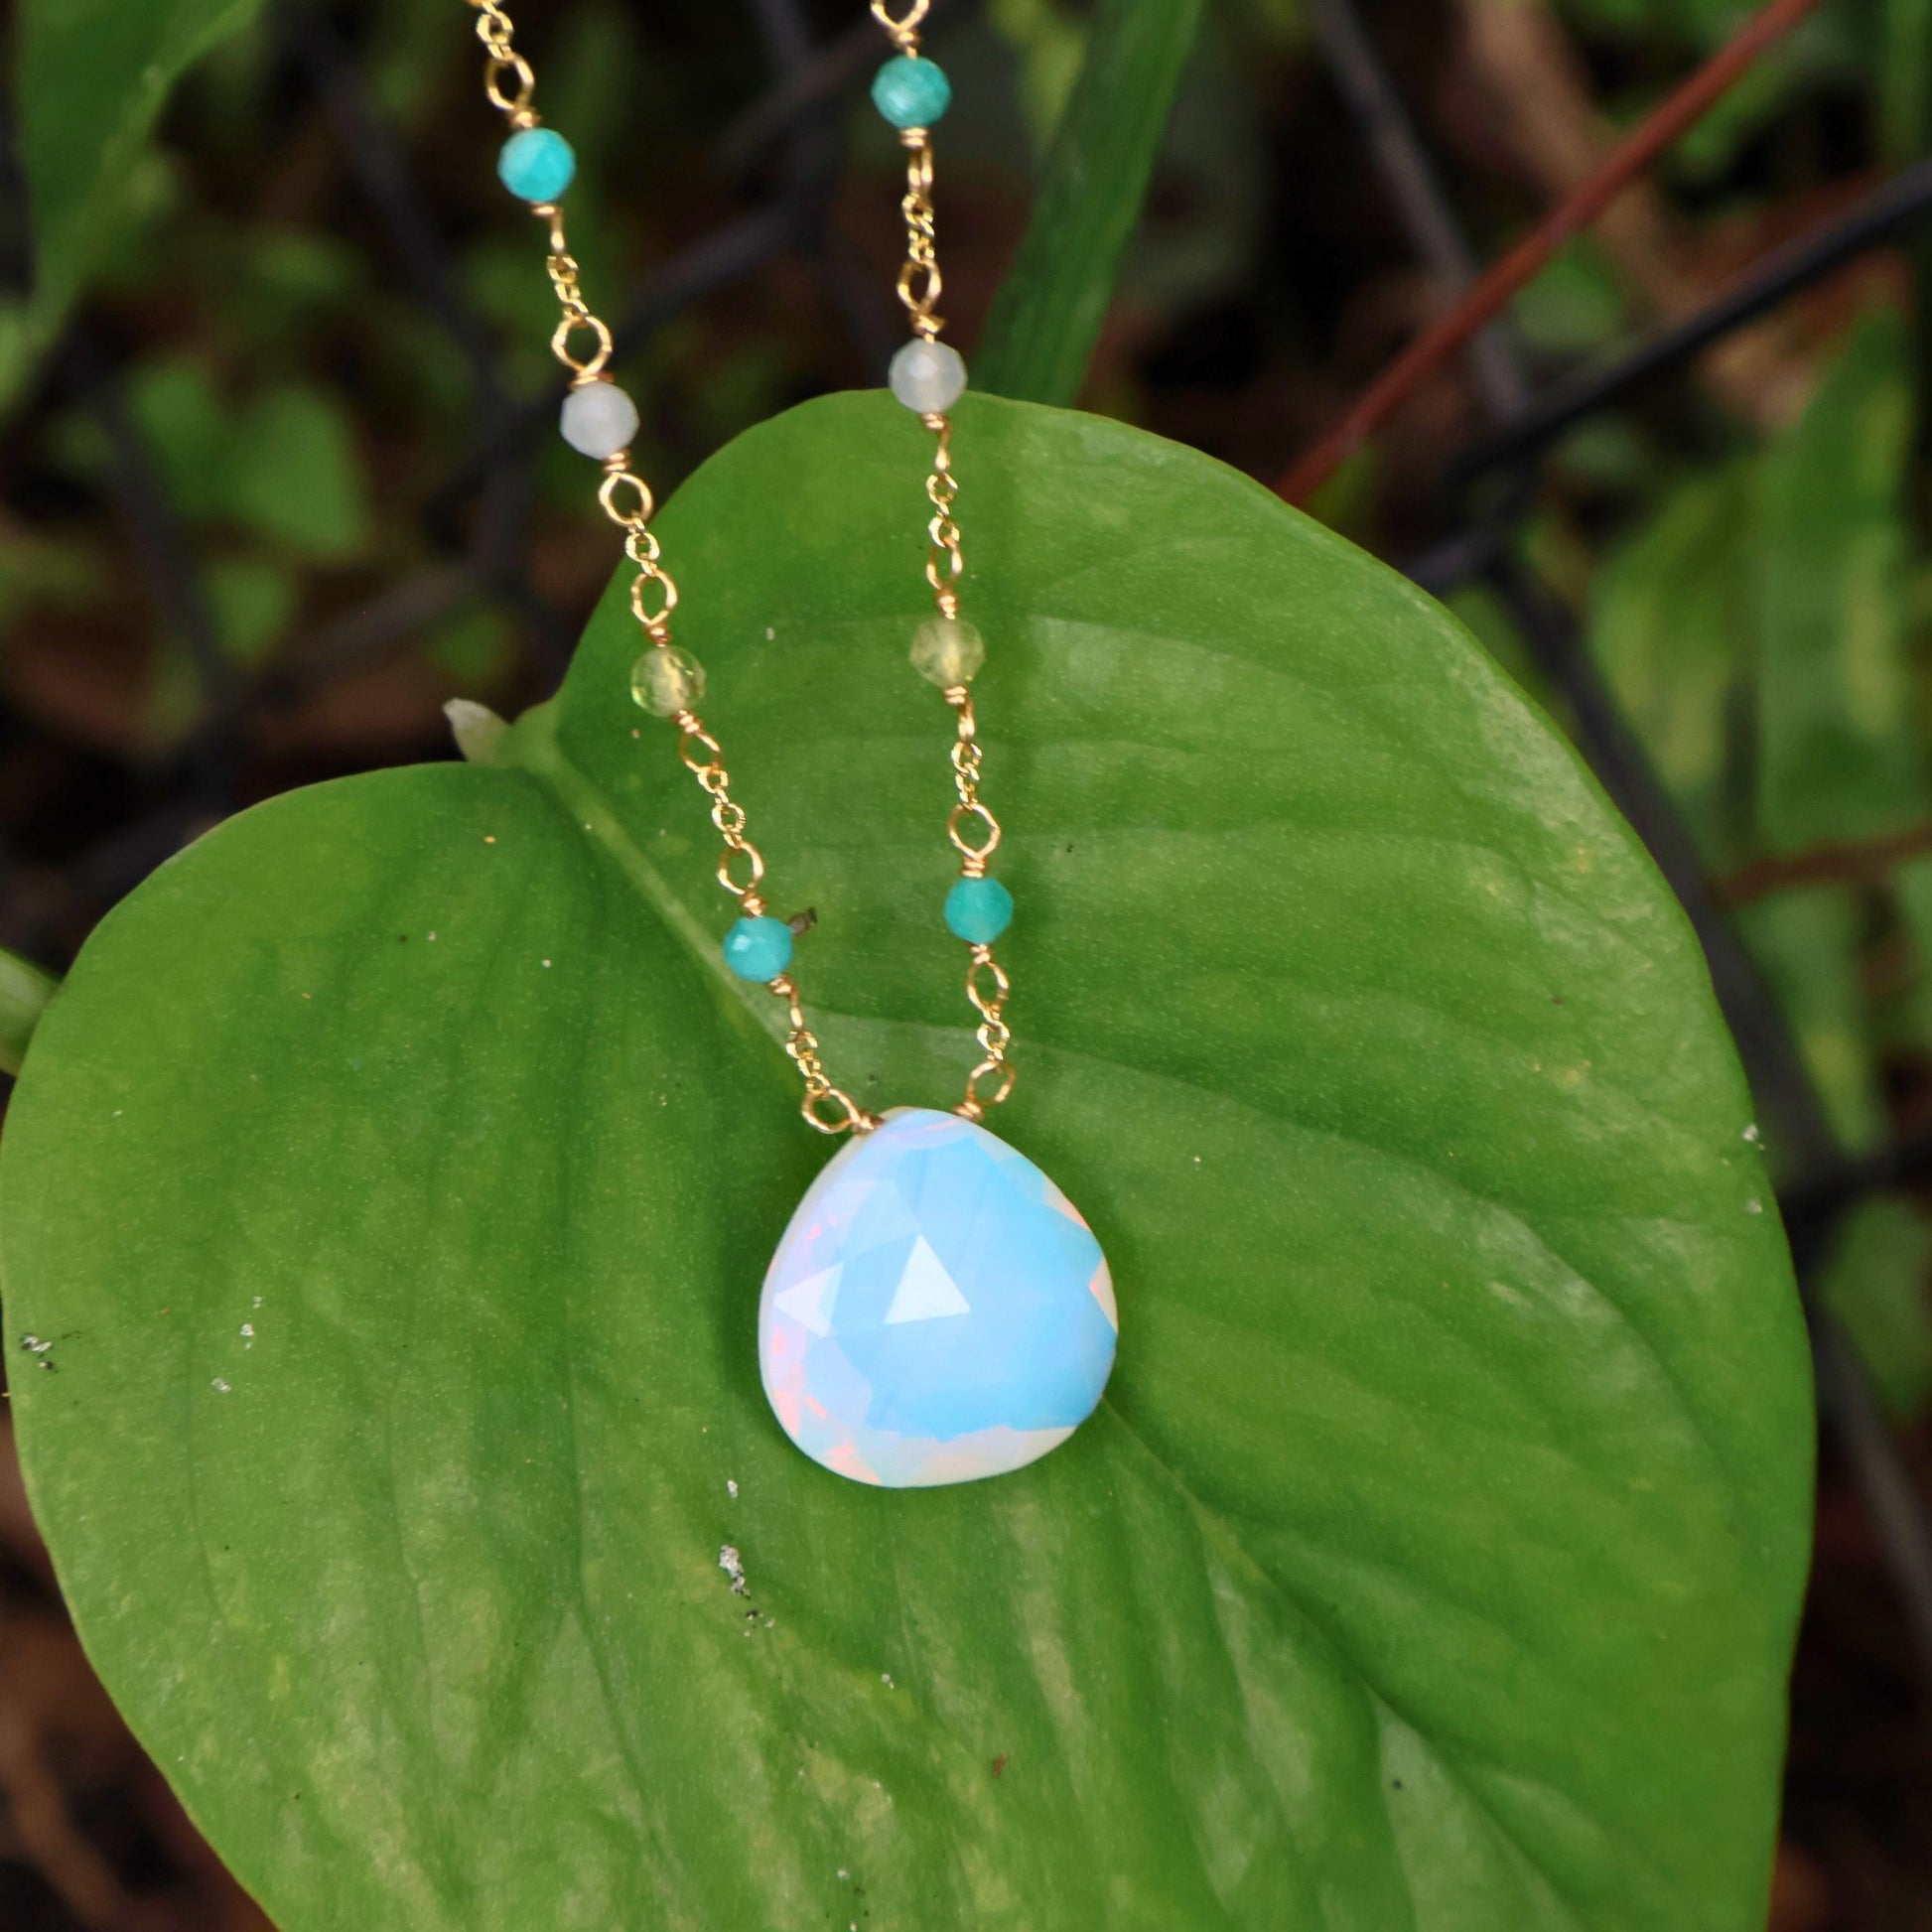 Opalite and Peridot for Emotional Support and Detoxification